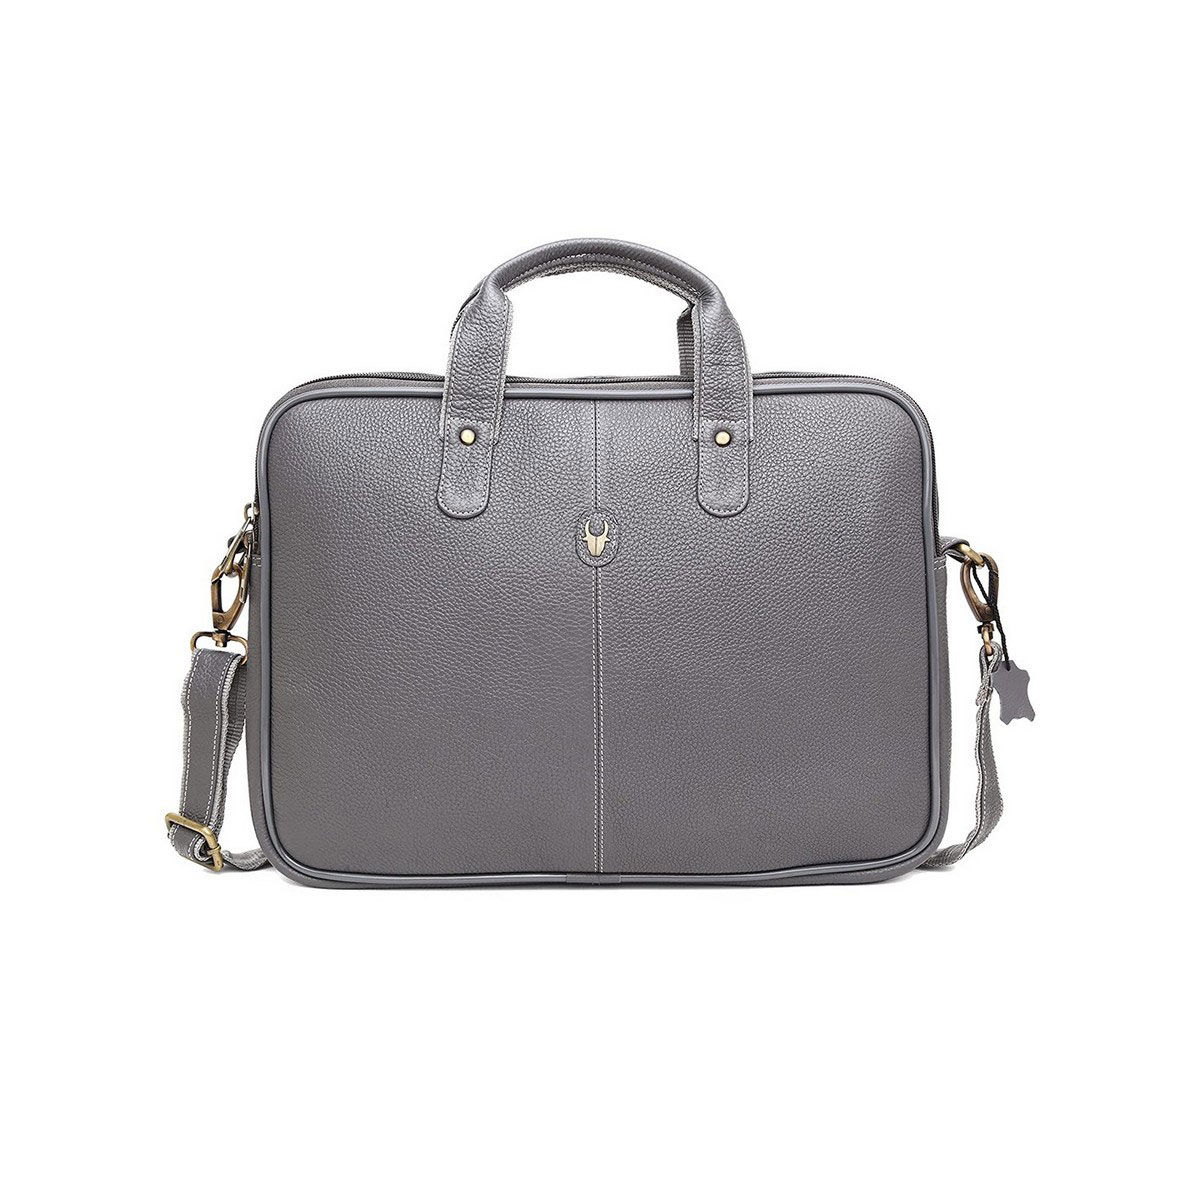 WILDHORN Messenger Bags  Buy WILDHORN Brown Classic Leather Messenger Bag  for Men I Office Bags I Travel Bags Online  Nykaa Fashion